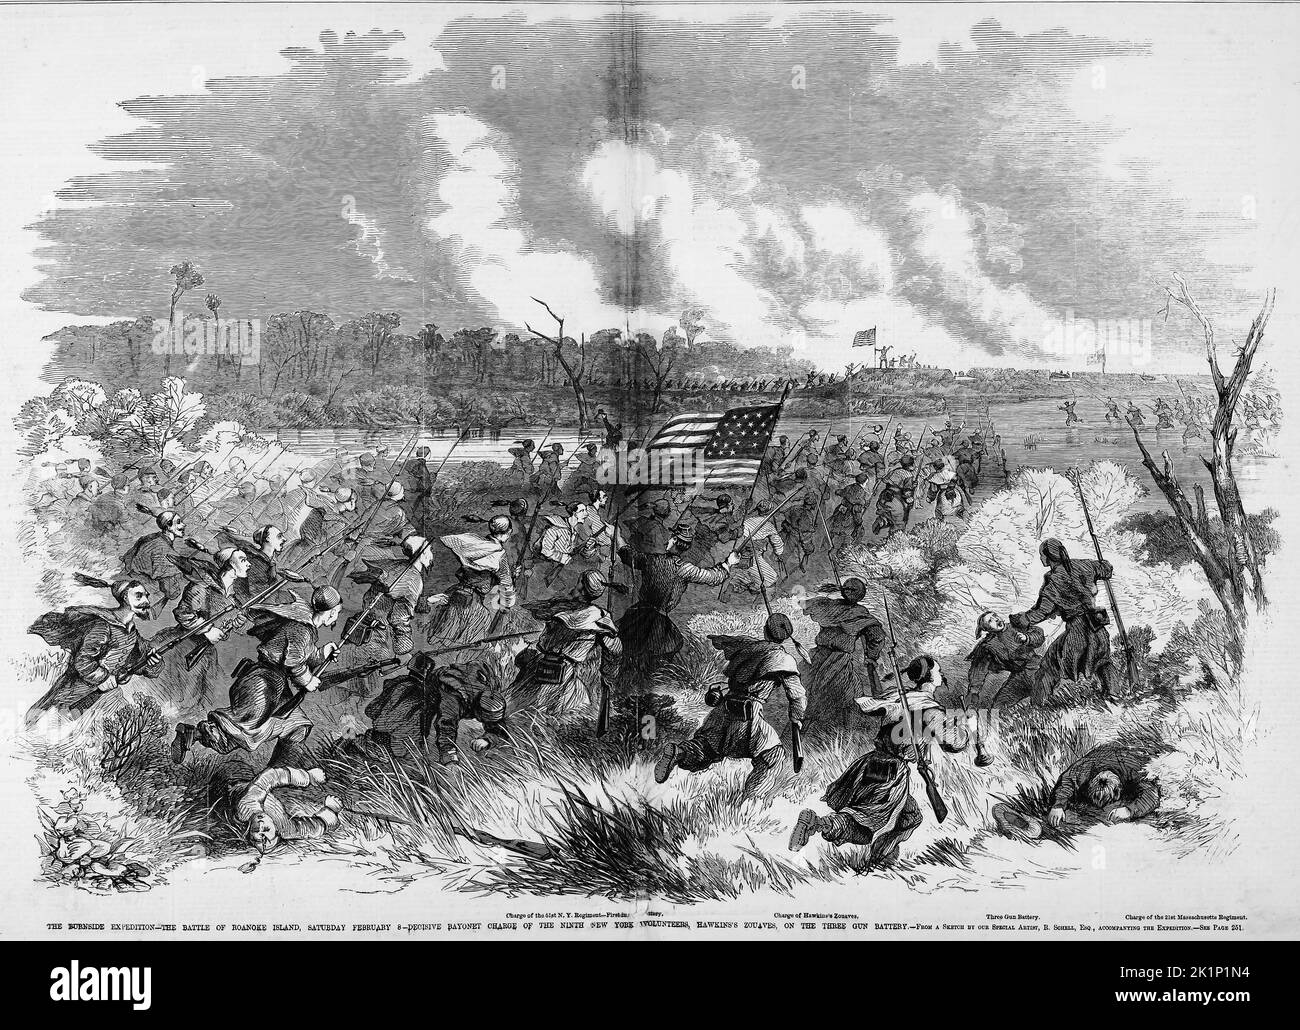 The Burnside Expedition - The Battle of Roanoke Island, North Carolina, February 8th, 1862 - Decisive bayonet charge of the 9th New York Volunteers, Hawkin's Zouaves, on the three gun battery. 19th century American Civil War illustration from Frank Leslie's Illustrated Newspaper Stock Photo